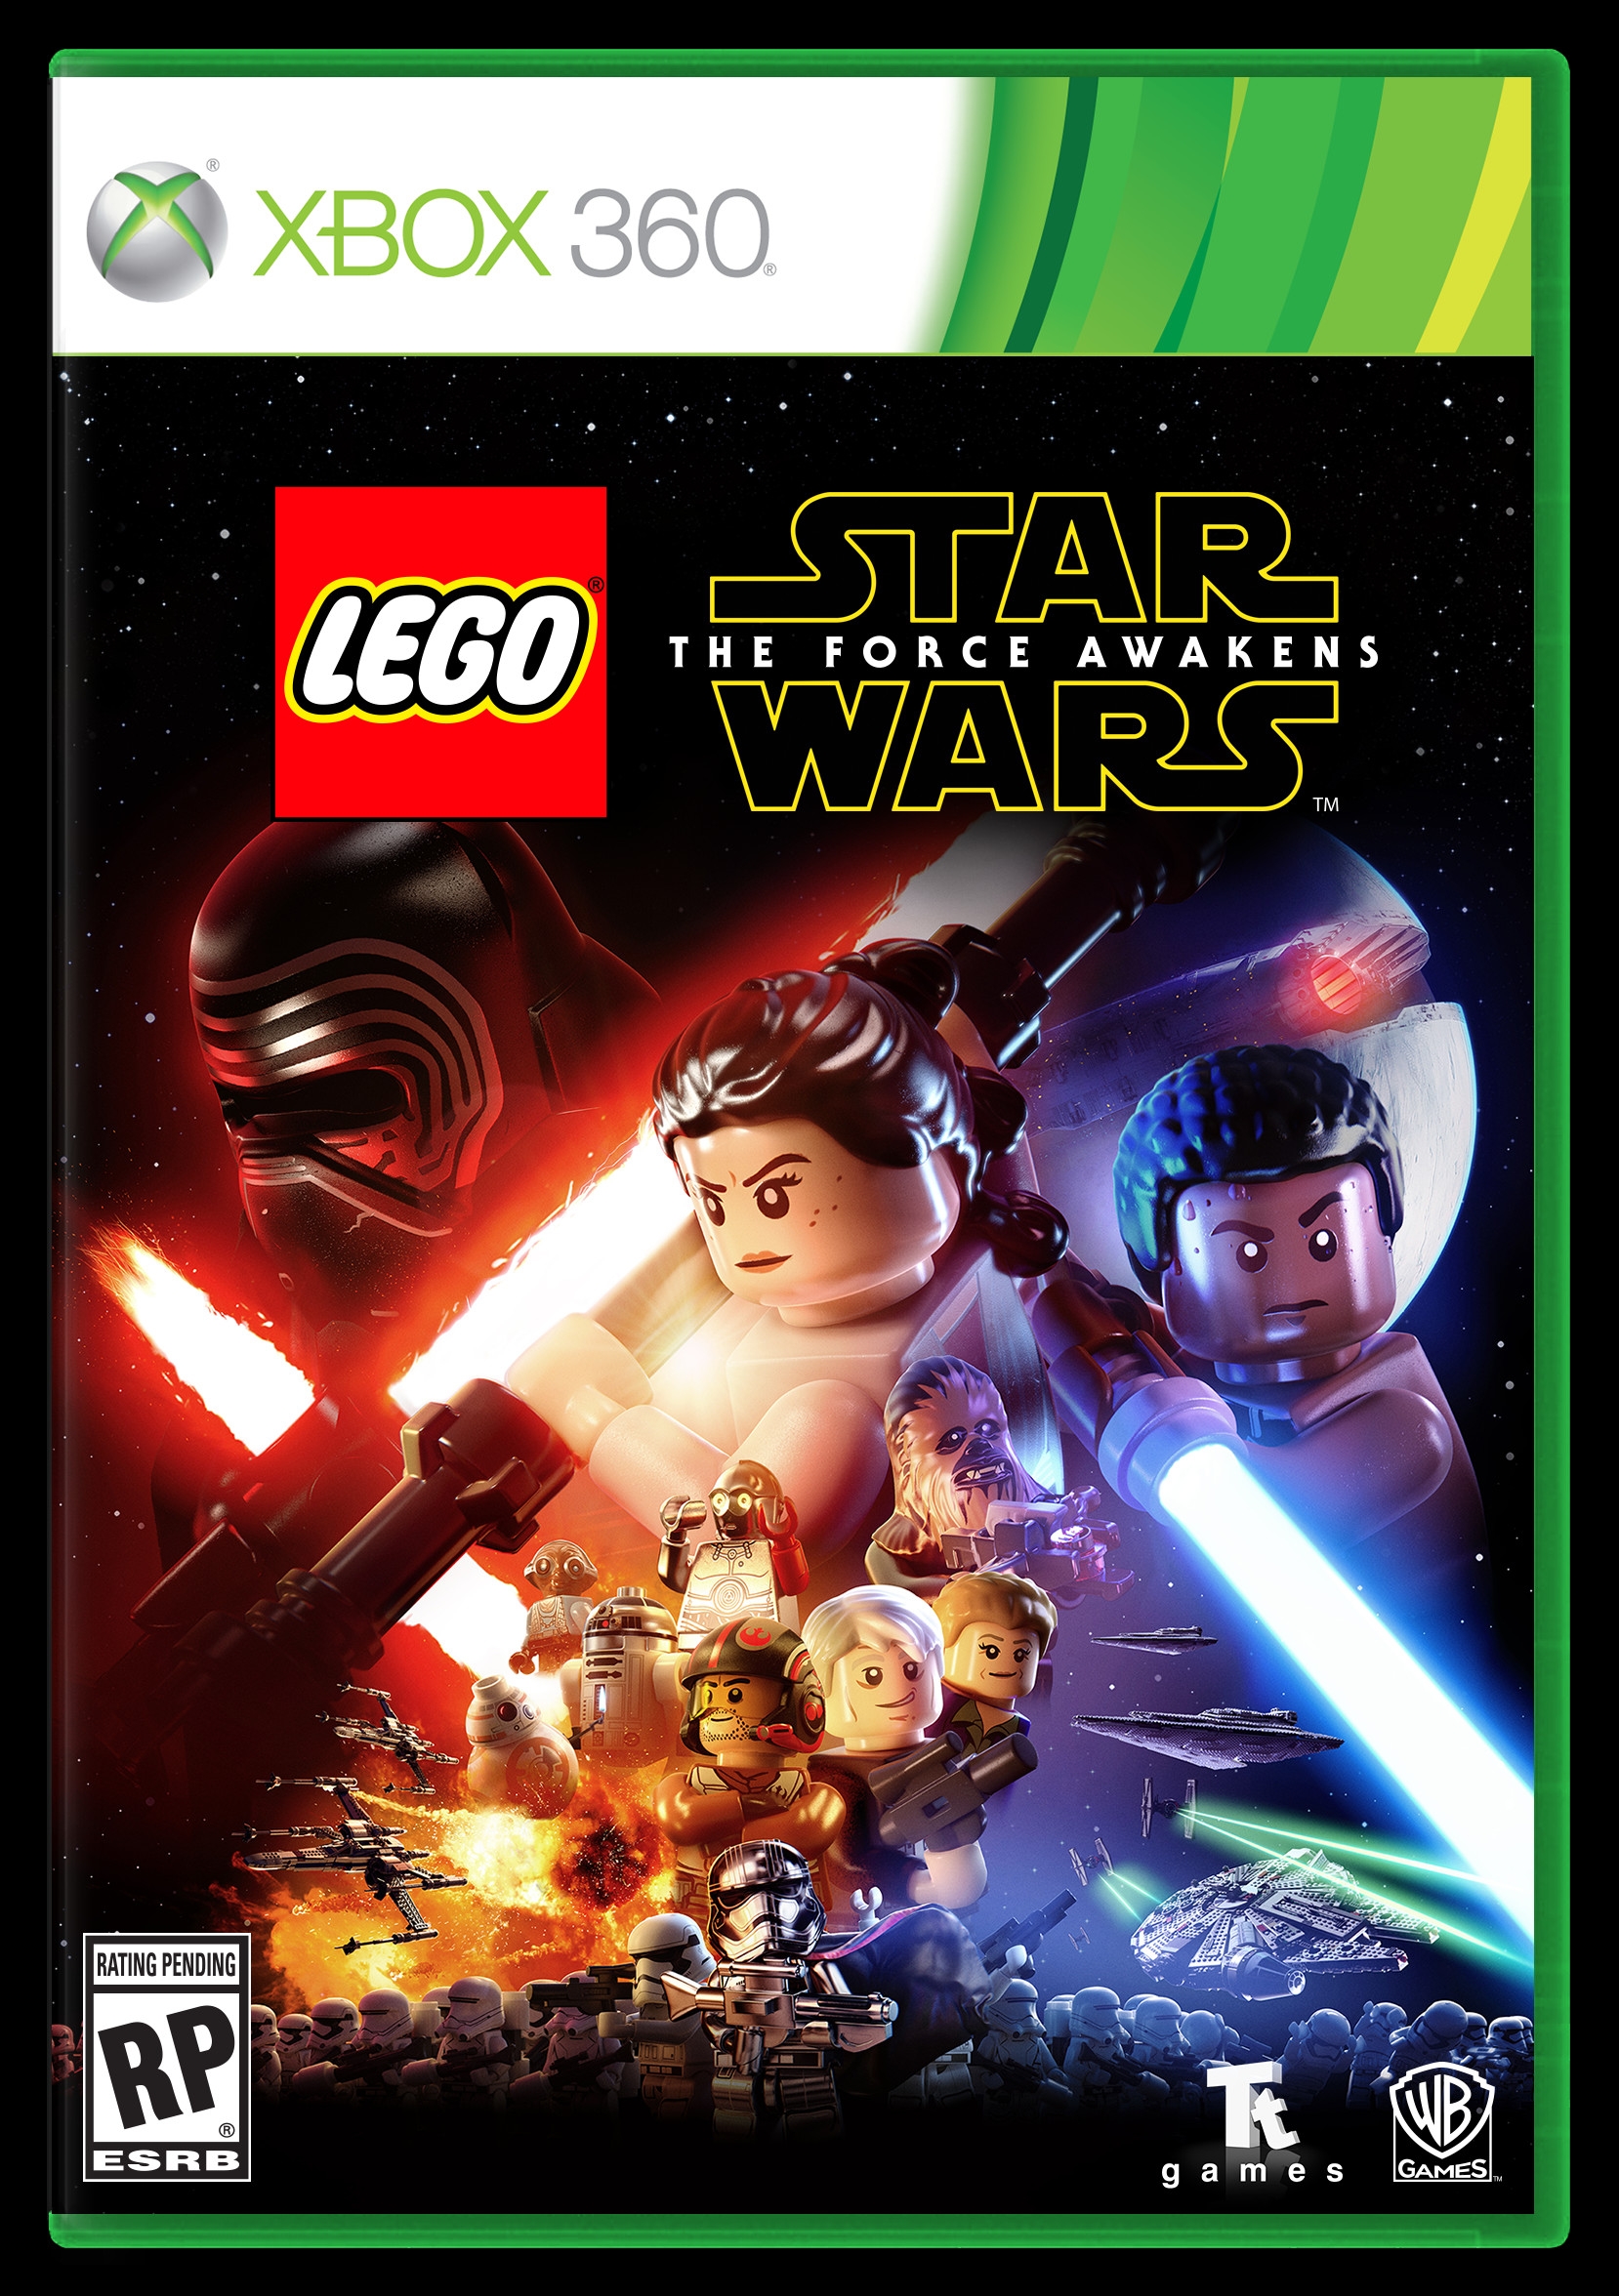 Lego Star Wars The Force Awakens Xbox 360 Video Game 5005137 Star Wars Buy Online At The Official Lego Shop Us